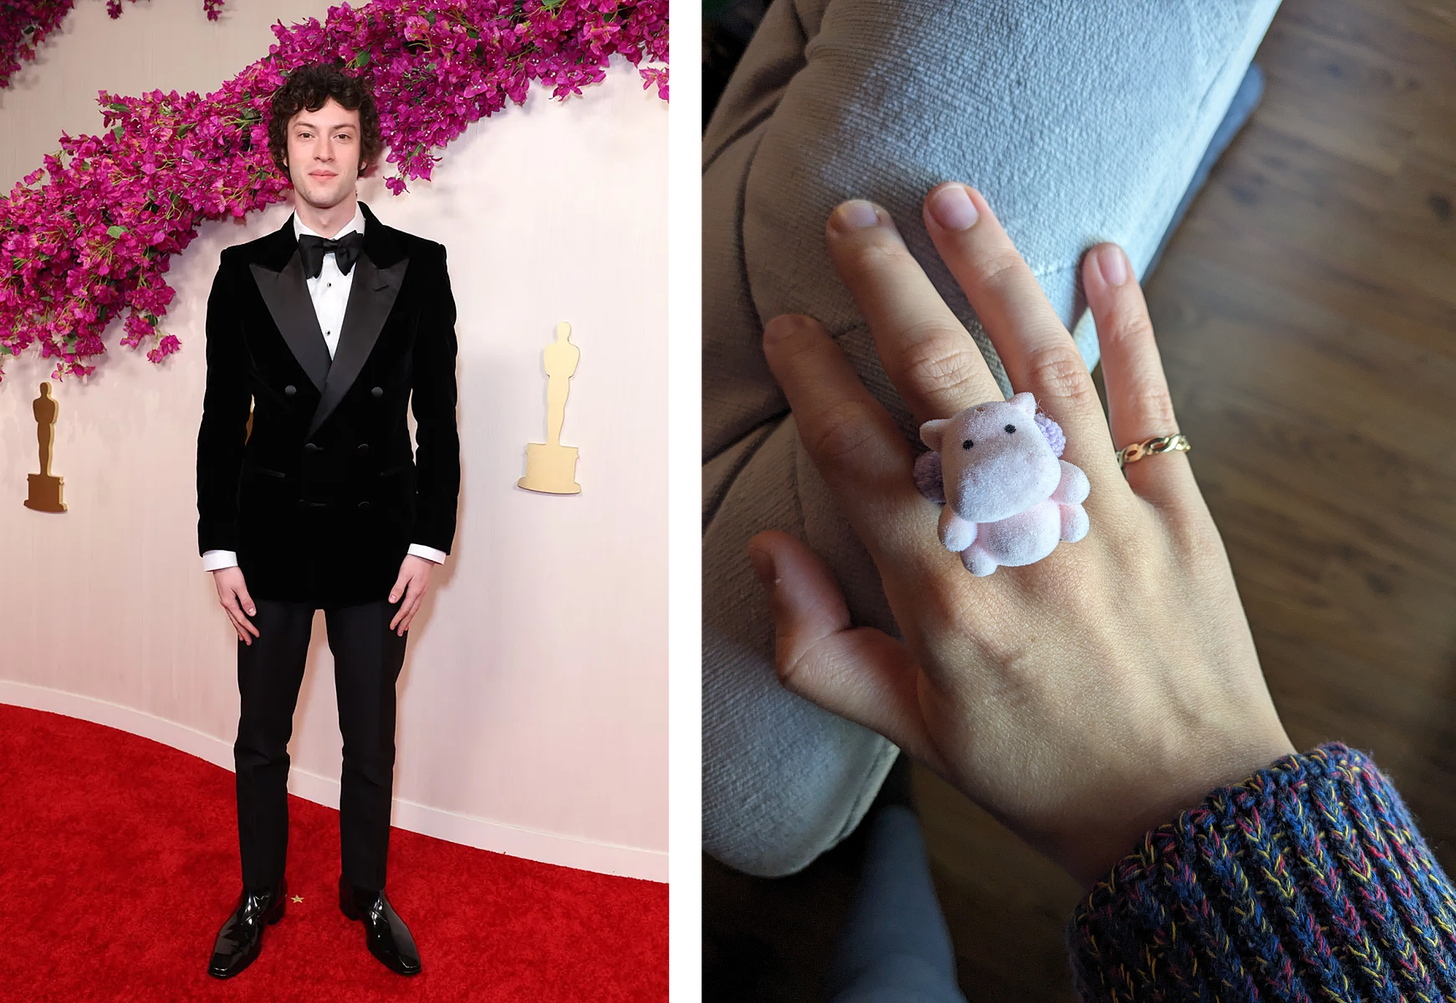 Left: Dominic Sessa in a double-breasted velvety suit and bow tie. Right: a pale pink fuzzy hippo on a lavender hair tie, displayed on a finger.